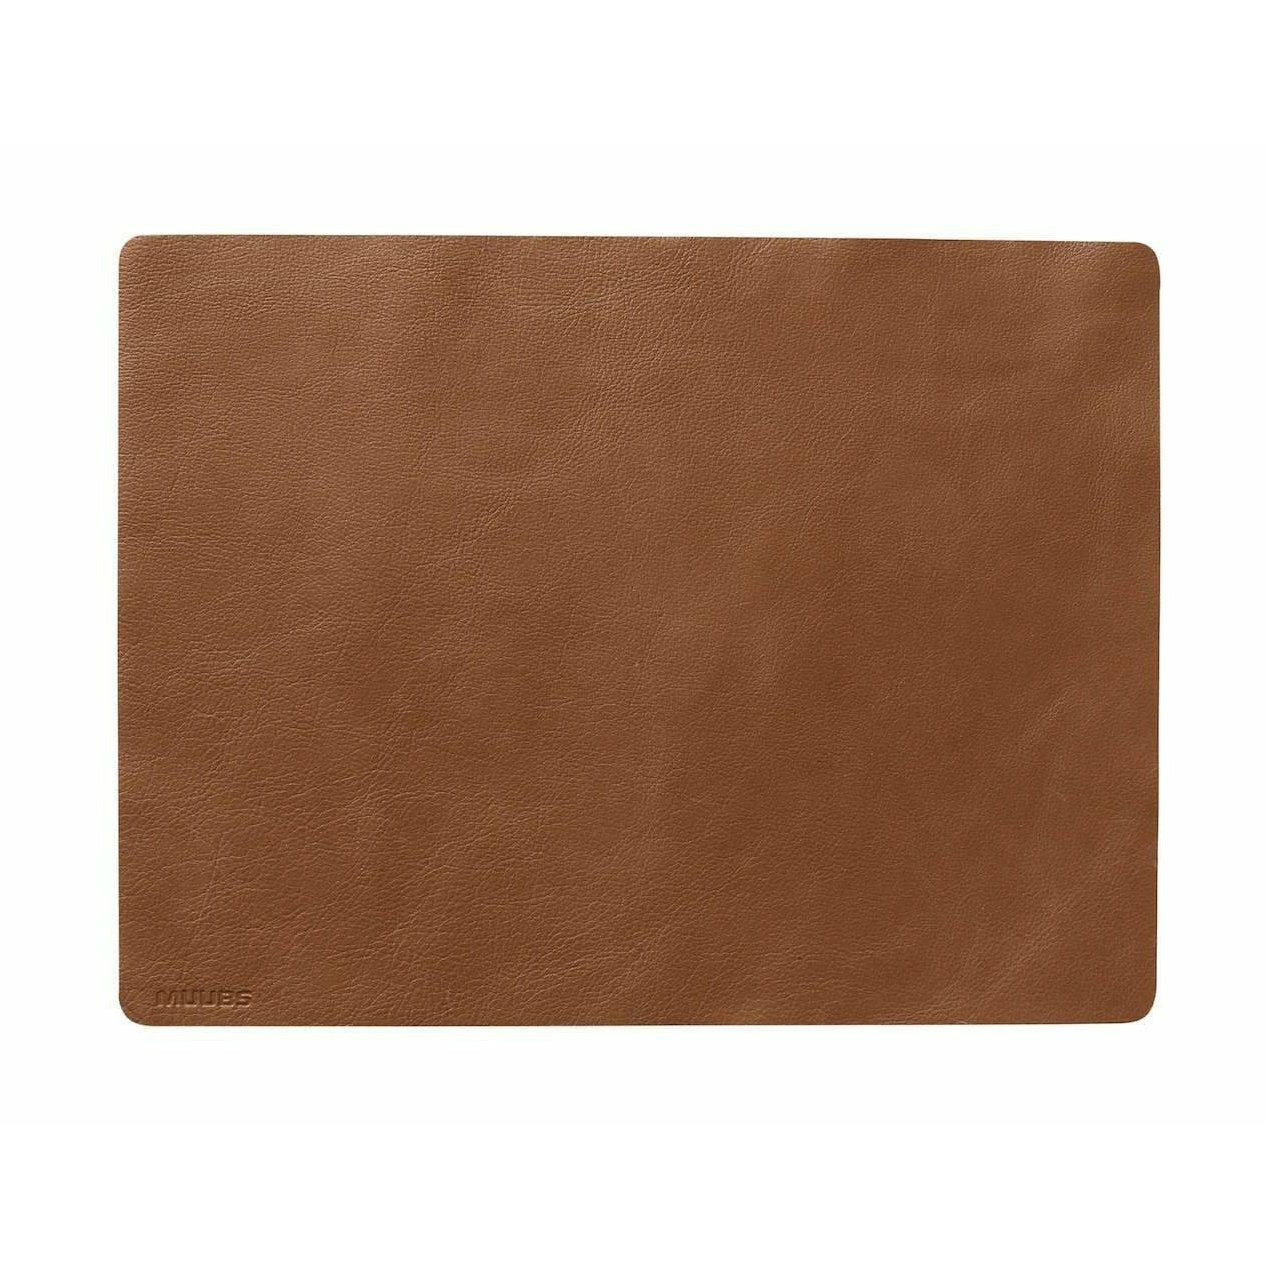 Muubs Camou Placemat 45cm, brunt skinn